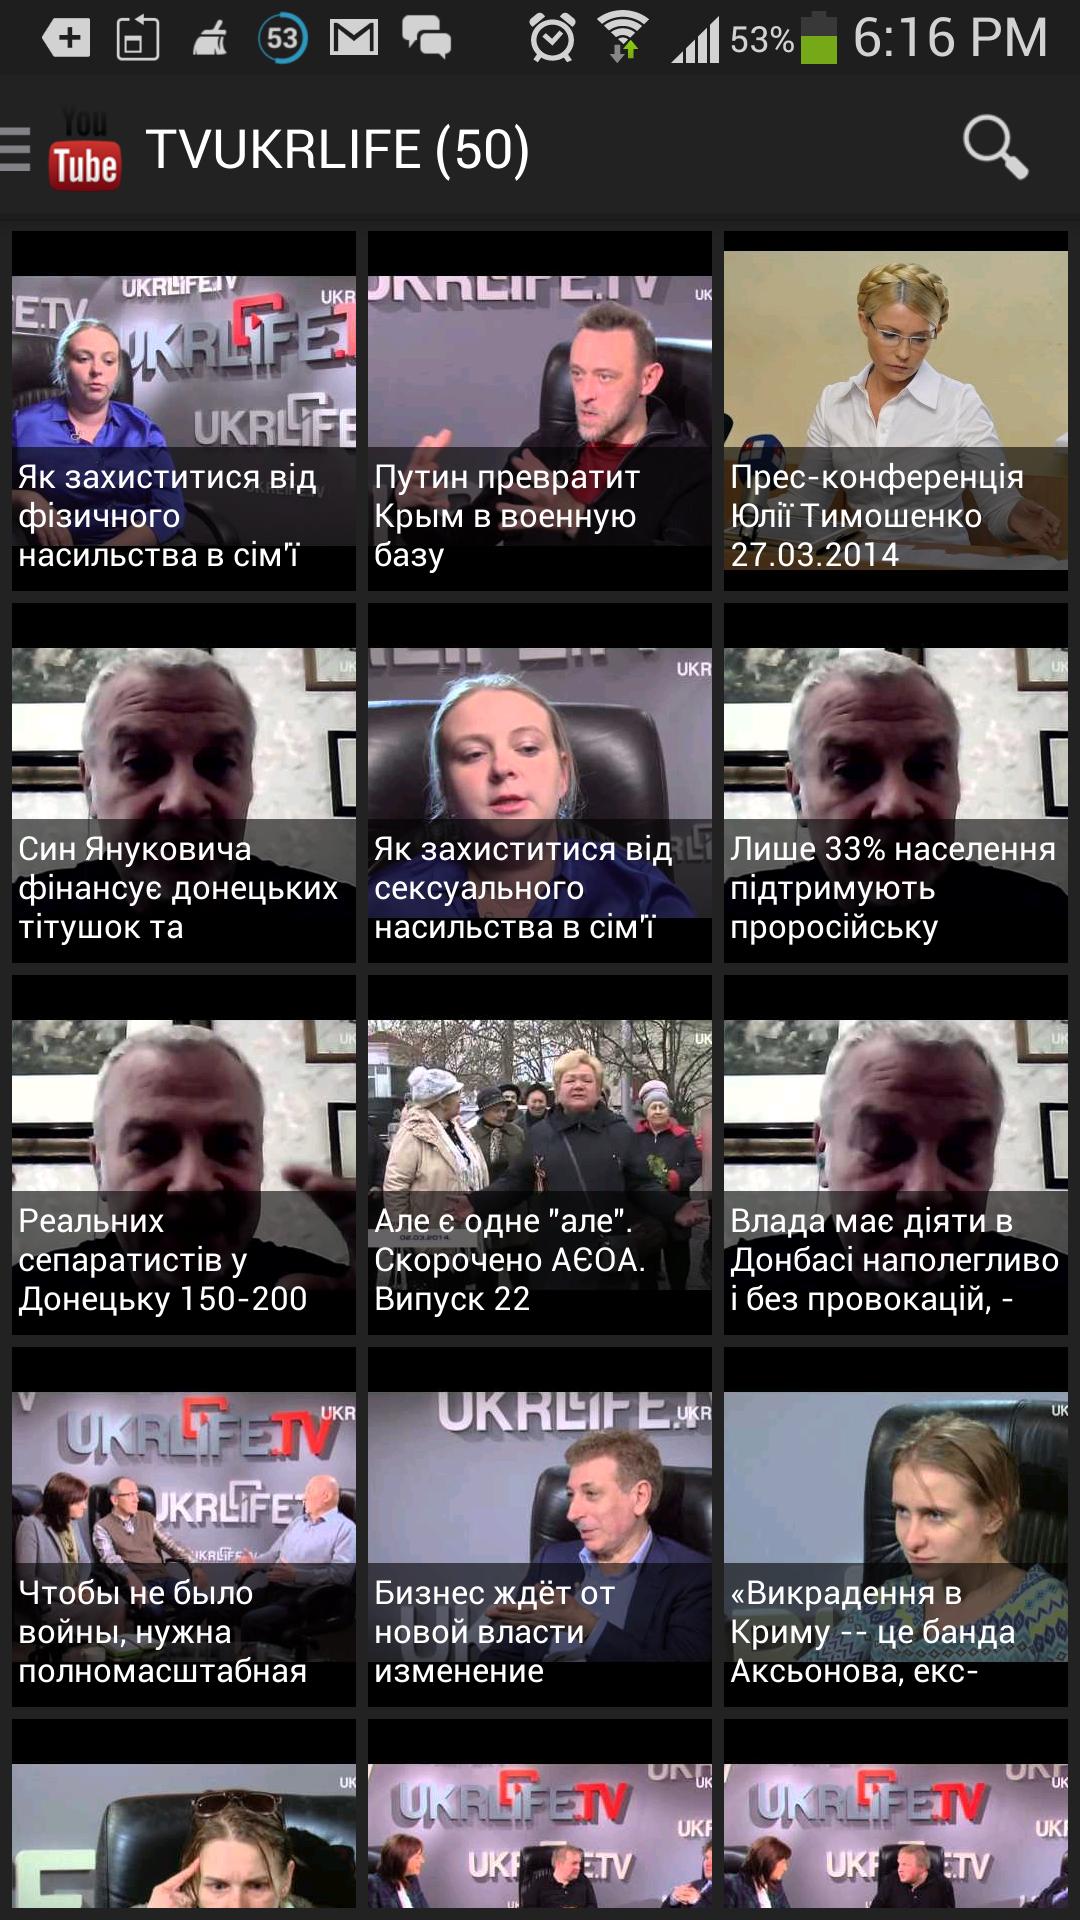 UkrLife.TV for Android - APK Download